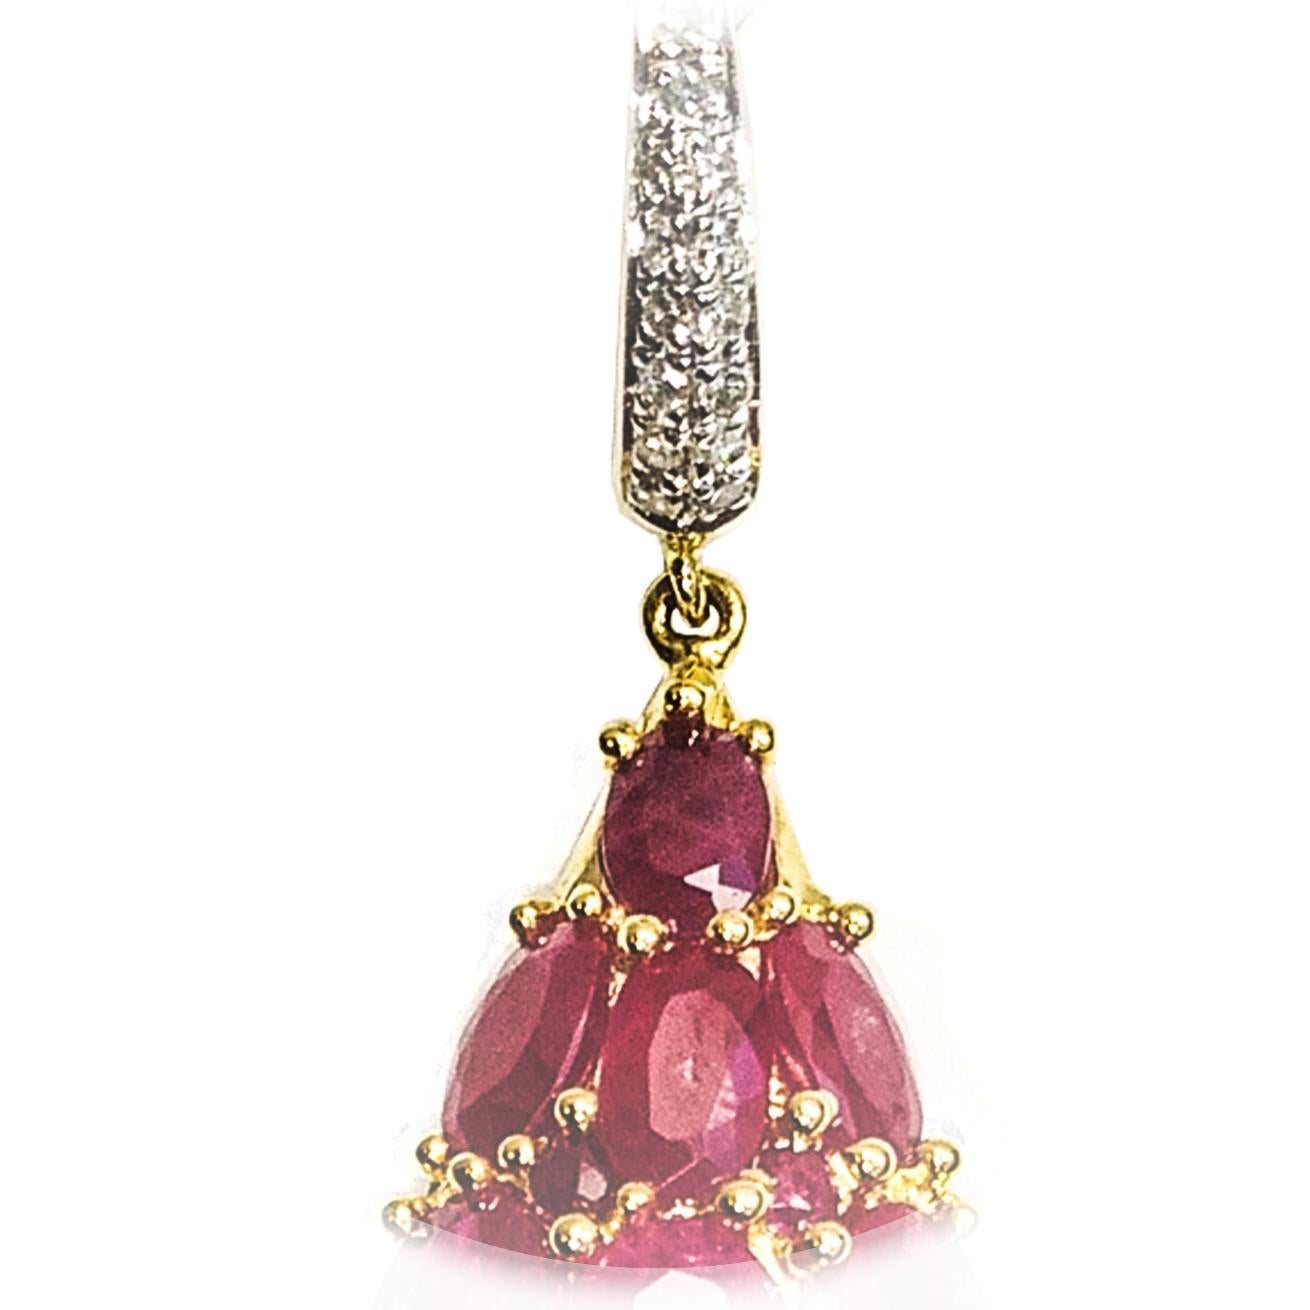 Glamorous design. Honeycomb inspired, high luster, natural intense pinkish red oval faceted rubies, carefully individually mounted with prongs setting. Contemporary long dangling, curved dome, pear shape design, attached with sparkling round